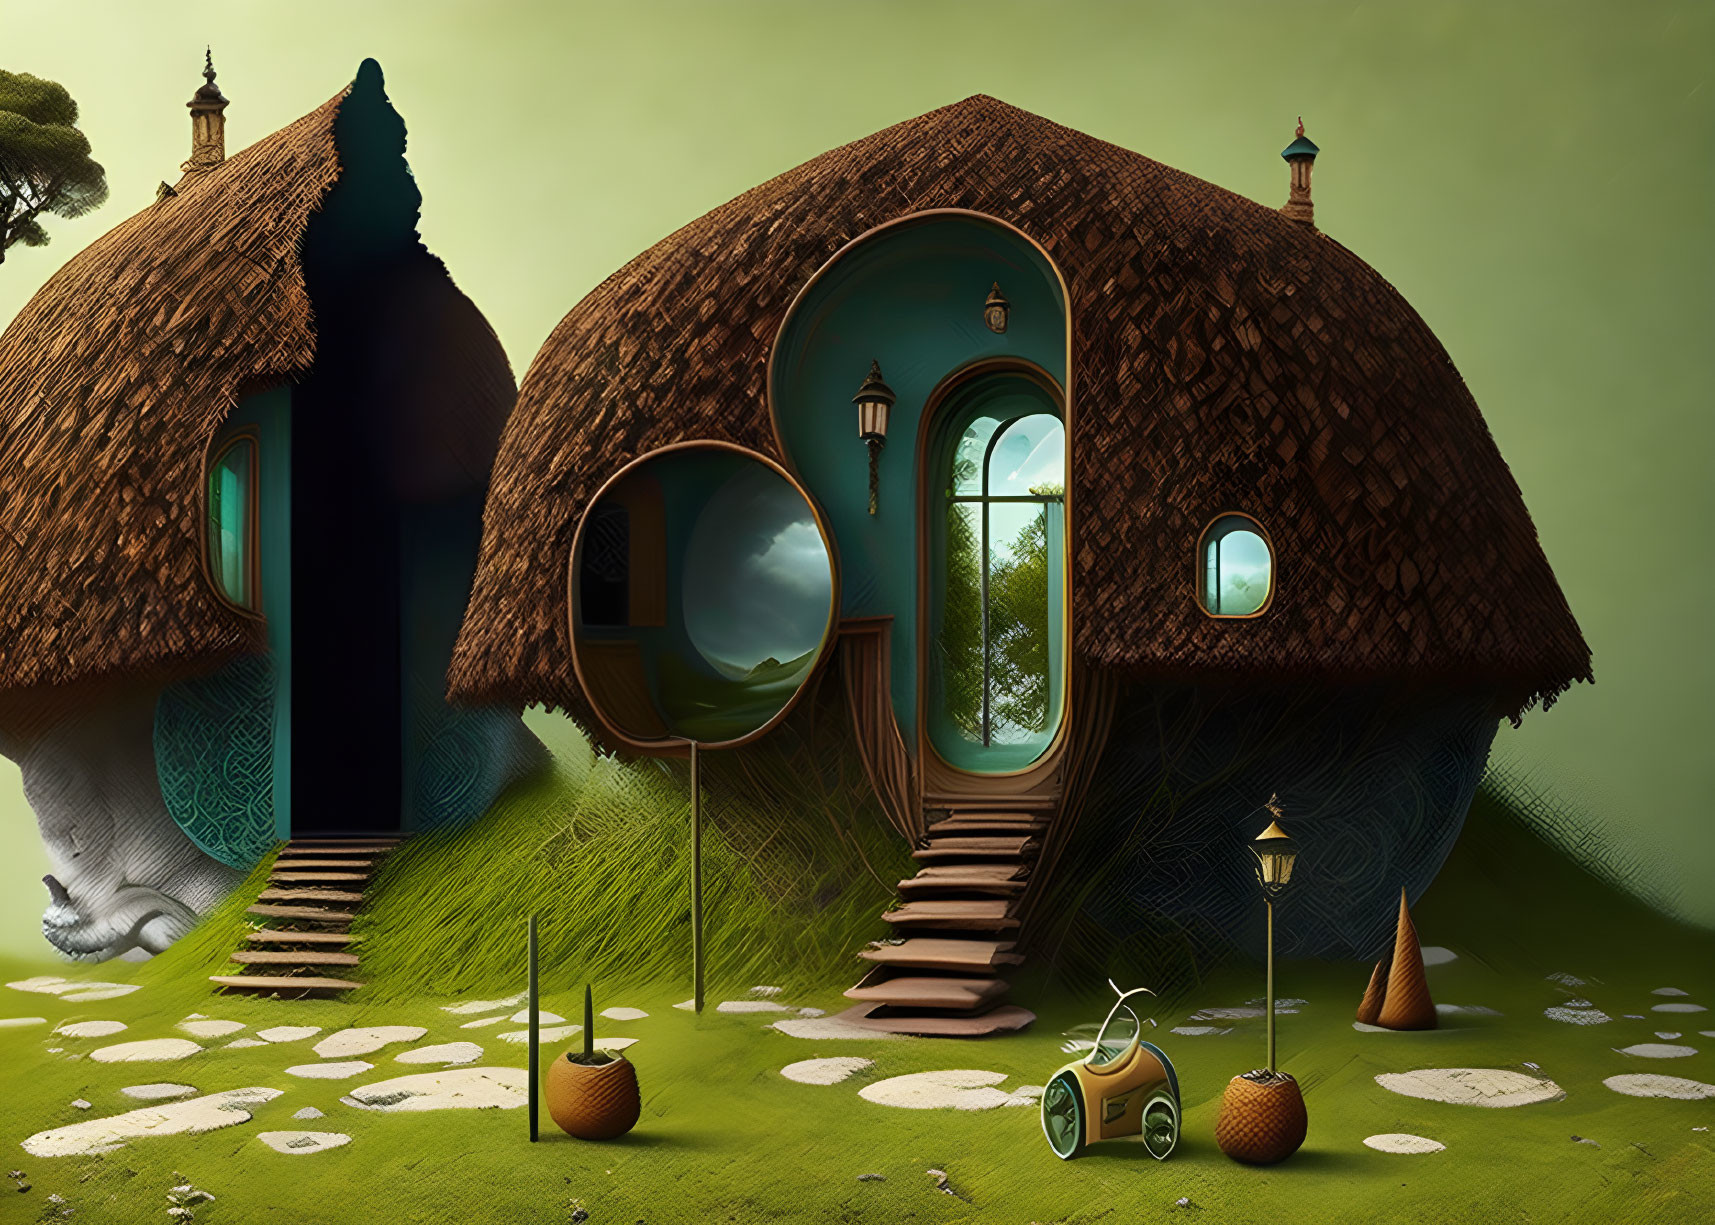 Whimsical fantasy landscape with round thatched-roof huts and lush greenery